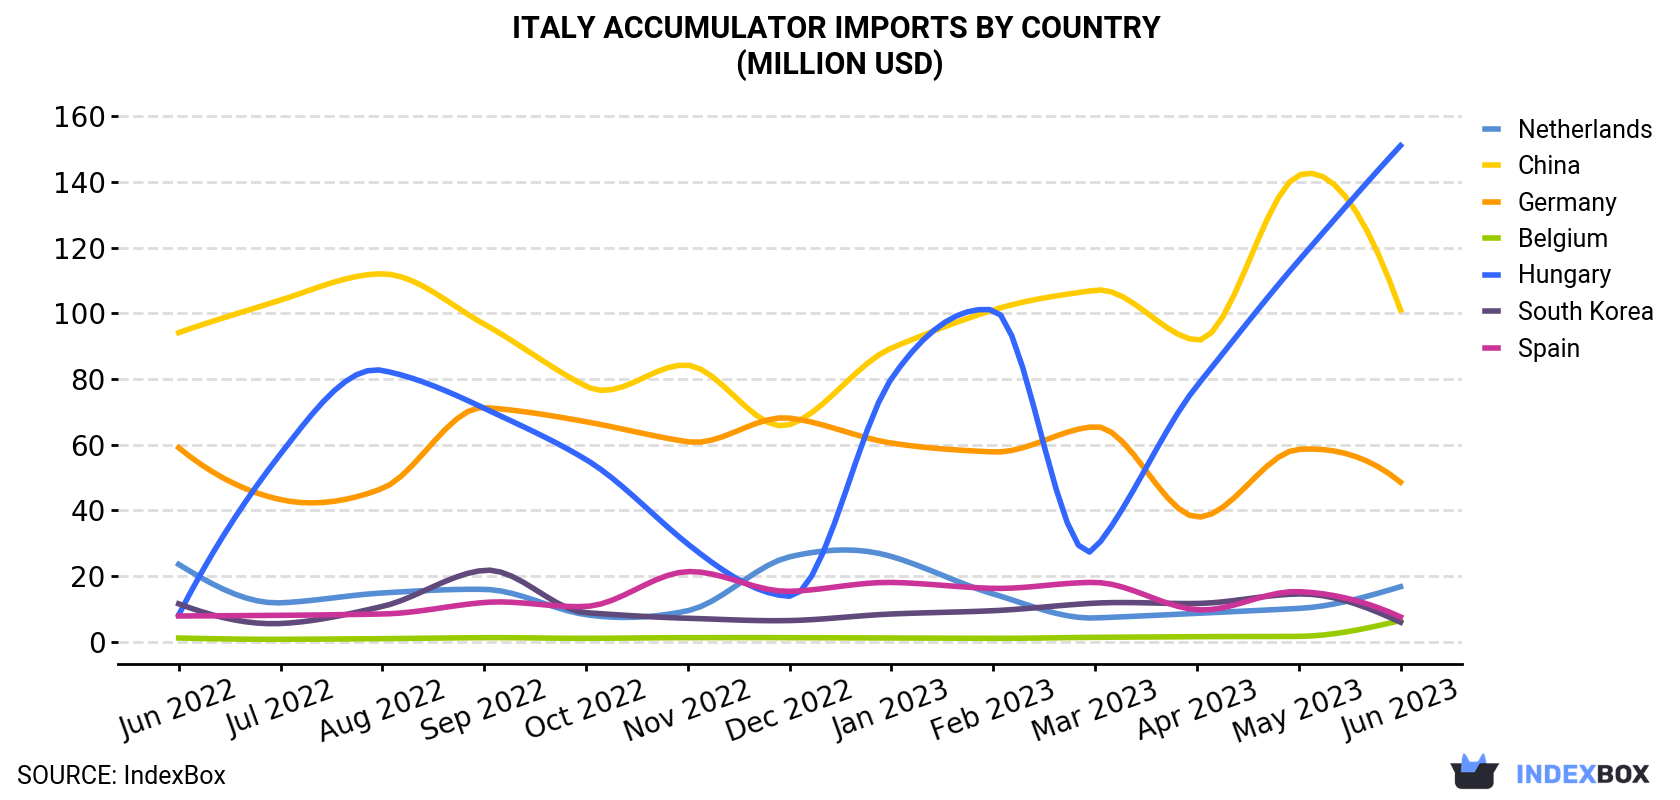 Italy Accumulator Imports By Country (Million USD)